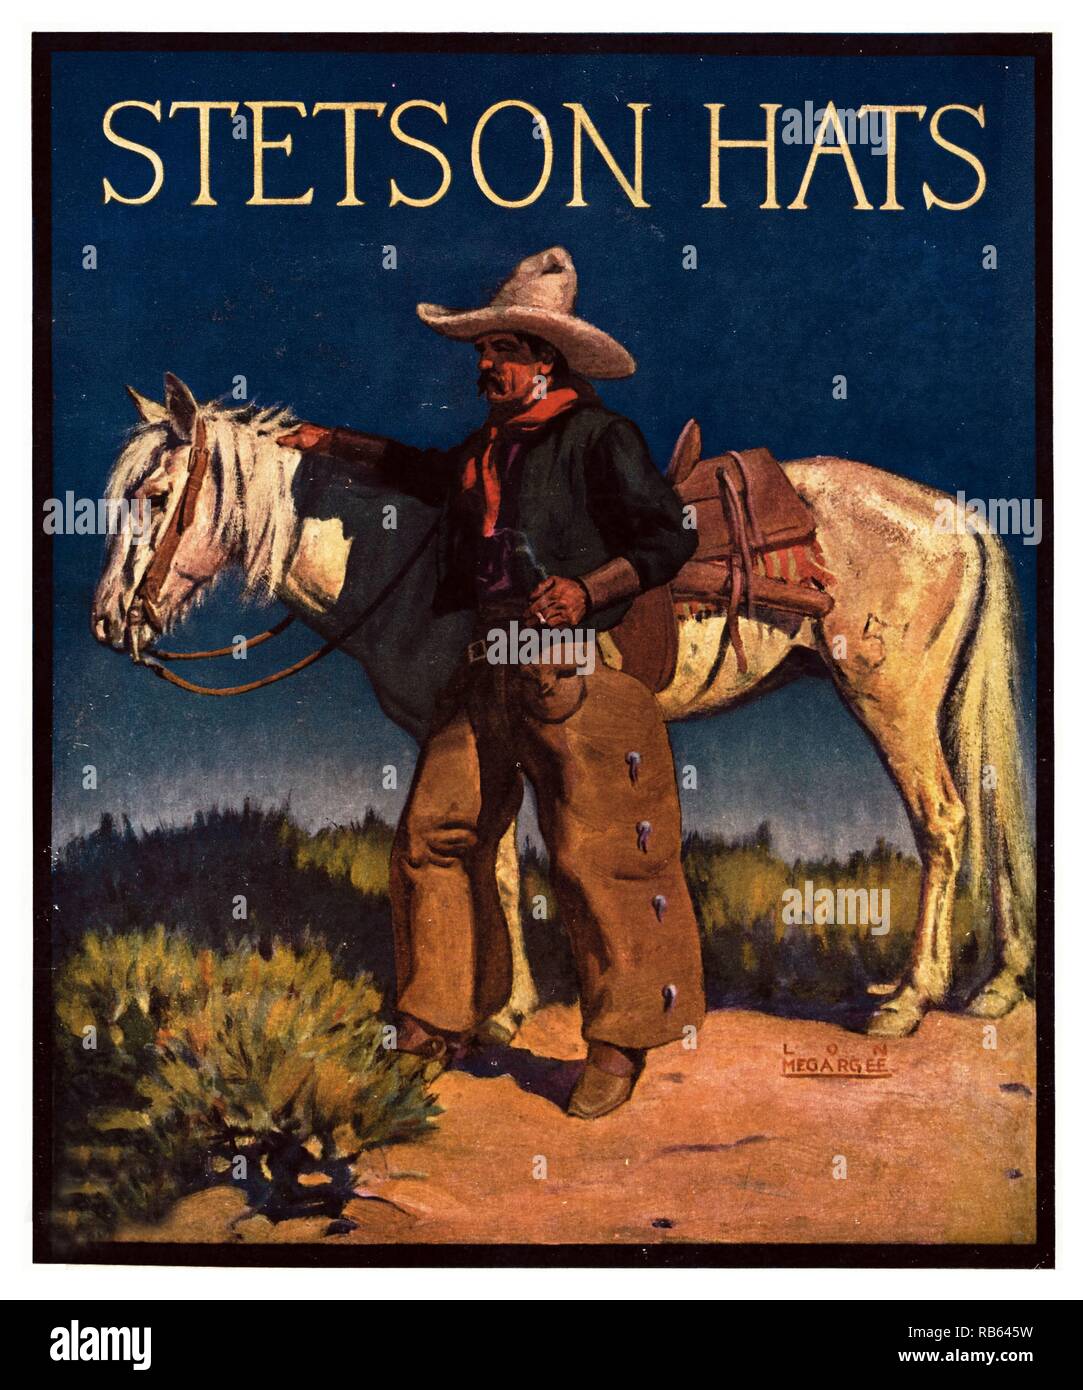 Stetson Hats, best known in the world. Company started in 1865 by John B Stetson. Poster images like this cowboy with his horse supported the Myth of the West, and reflected the values readers of Western novels and viewers of Western movies came to expect. Stock Photo